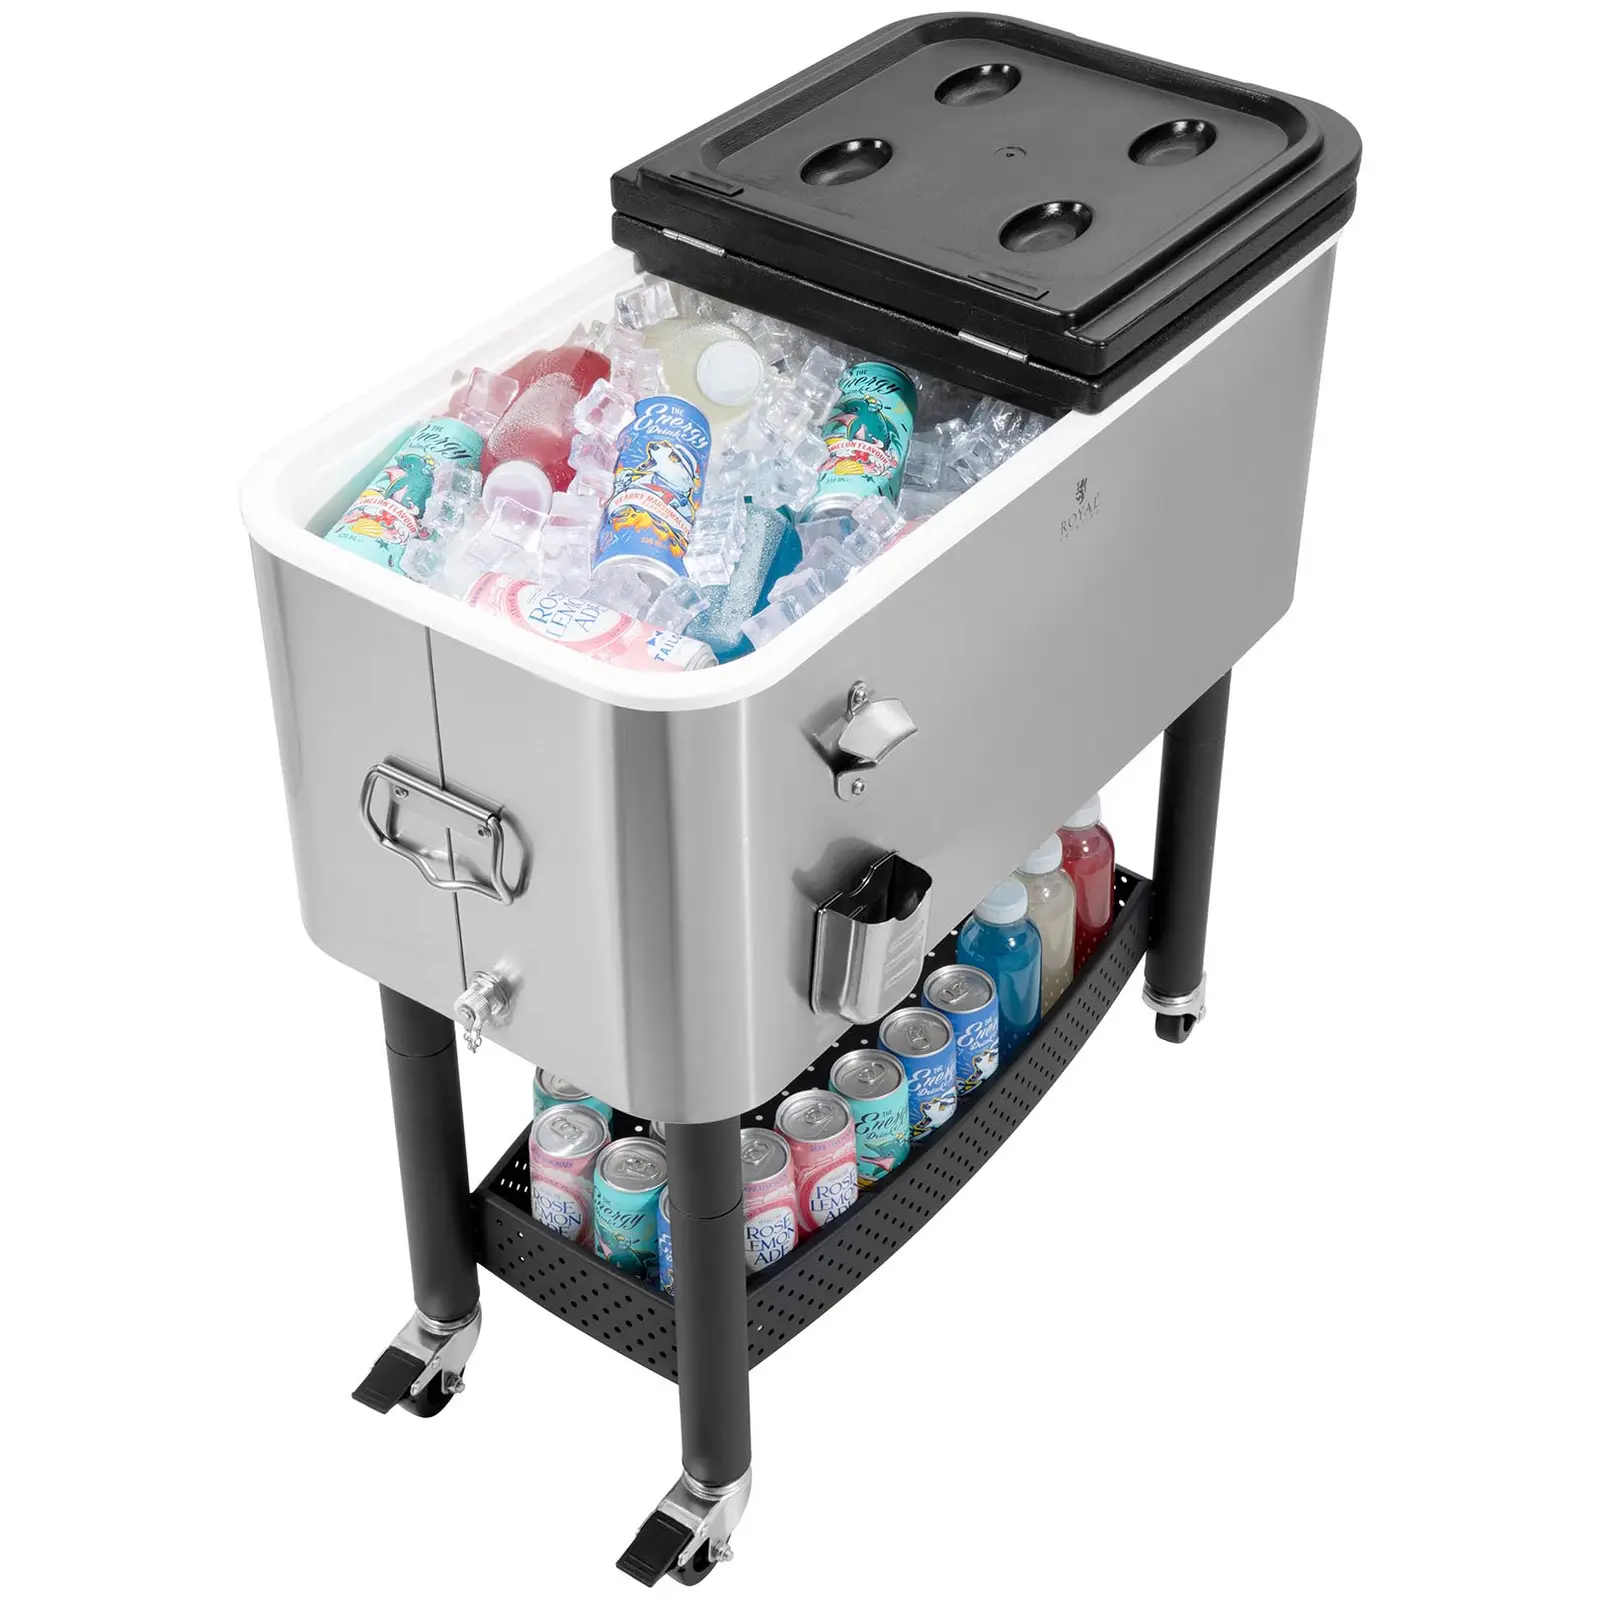 Factory second Cool box with chassis - 61 L - Royal Catering